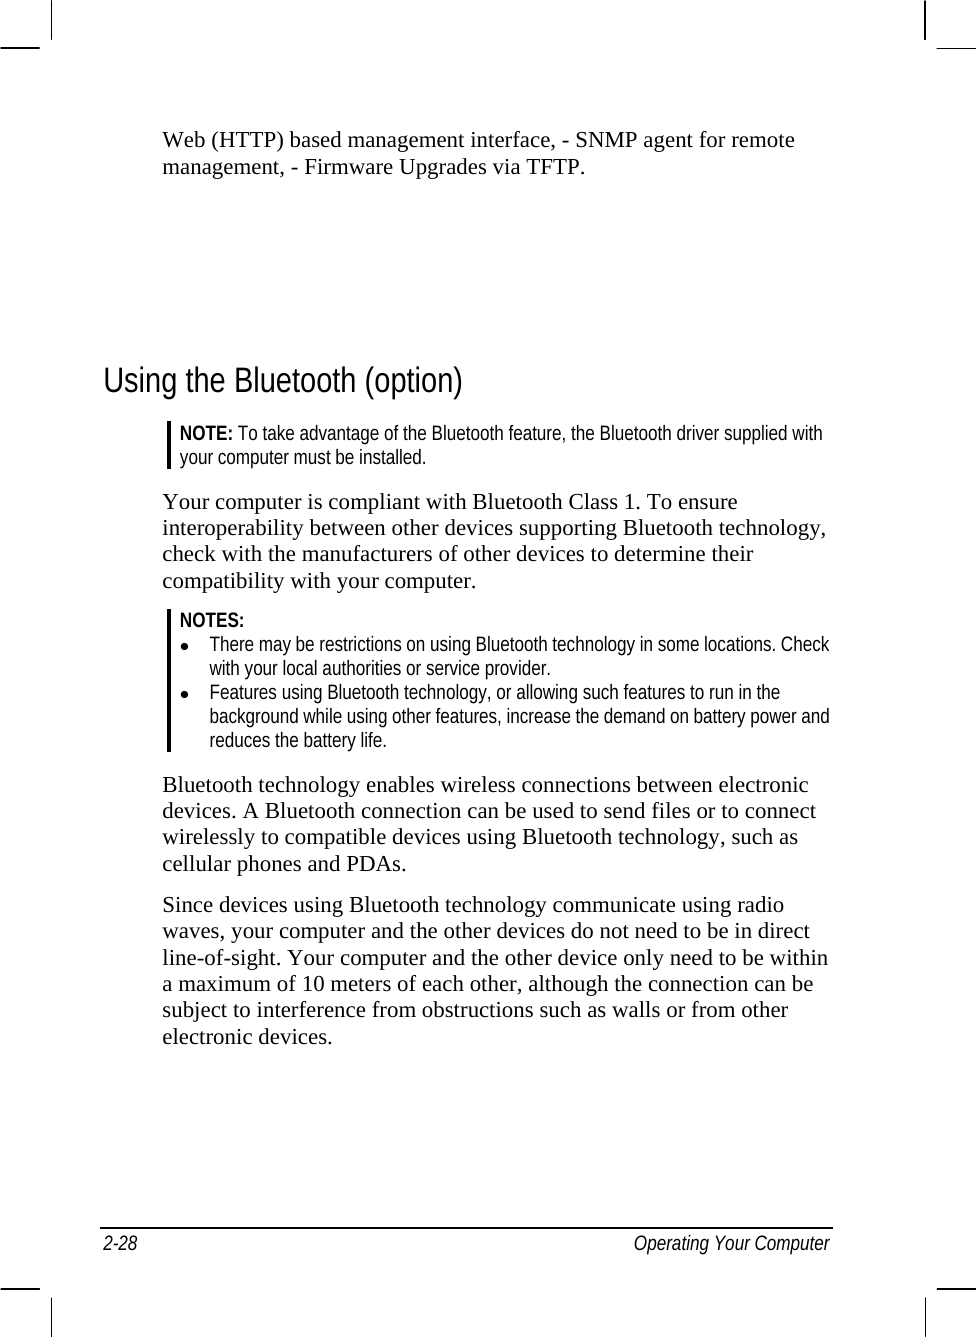  Web (HTTP) based management interface, - SNMP agent for remote management, - Firmware Upgrades via TFTP.     Using the Bluetooth (option) NOTE: To take advantage of the Bluetooth feature, the Bluetooth driver supplied with your computer must be installed.  Your computer is compliant with Bluetooth Class 1. To ensure interoperability between other devices supporting Bluetooth technology, check with the manufacturers of other devices to determine their compatibility with your computer. NOTES: z There may be restrictions on using Bluetooth technology in some locations. Check with your local authorities or service provider. z Features using Bluetooth technology, or allowing such features to run in the background while using other features, increase the demand on battery power and reduces the battery life.  Bluetooth technology enables wireless connections between electronic devices. A Bluetooth connection can be used to send files or to connect wirelessly to compatible devices using Bluetooth technology, such as cellular phones and PDAs. Since devices using Bluetooth technology communicate using radio waves, your computer and the other devices do not need to be in direct line-of-sight. Your computer and the other device only need to be within a maximum of 10 meters of each other, although the connection can be subject to interference from obstructions such as walls or from other electronic devices. 2-28 Operating Your Computer 